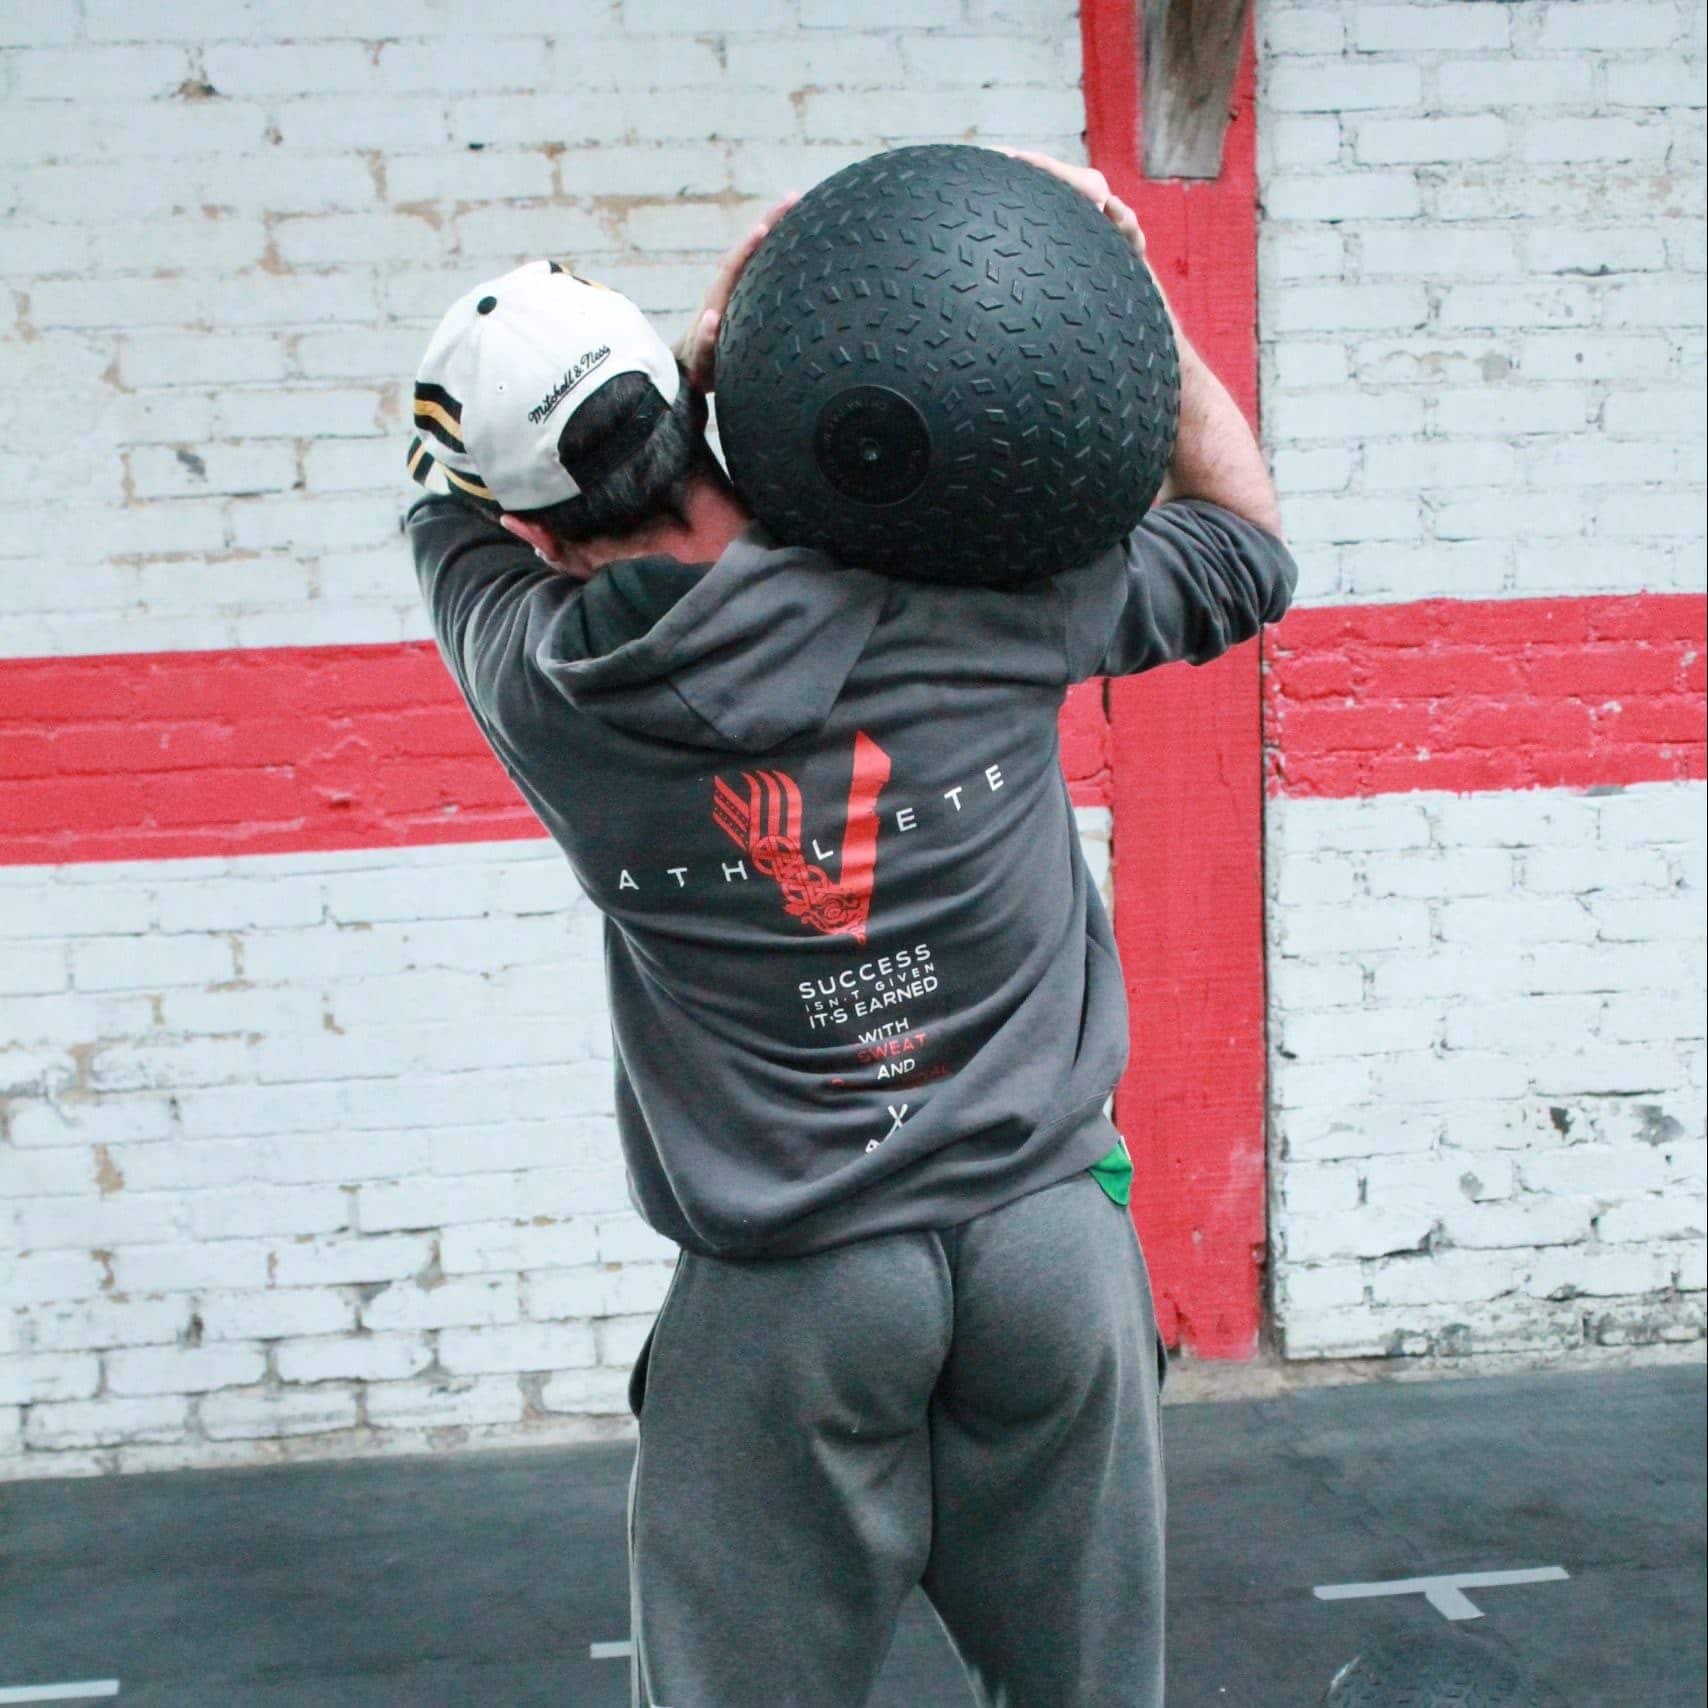 SLAM BALL 50 kg d'occasion comme neuf !